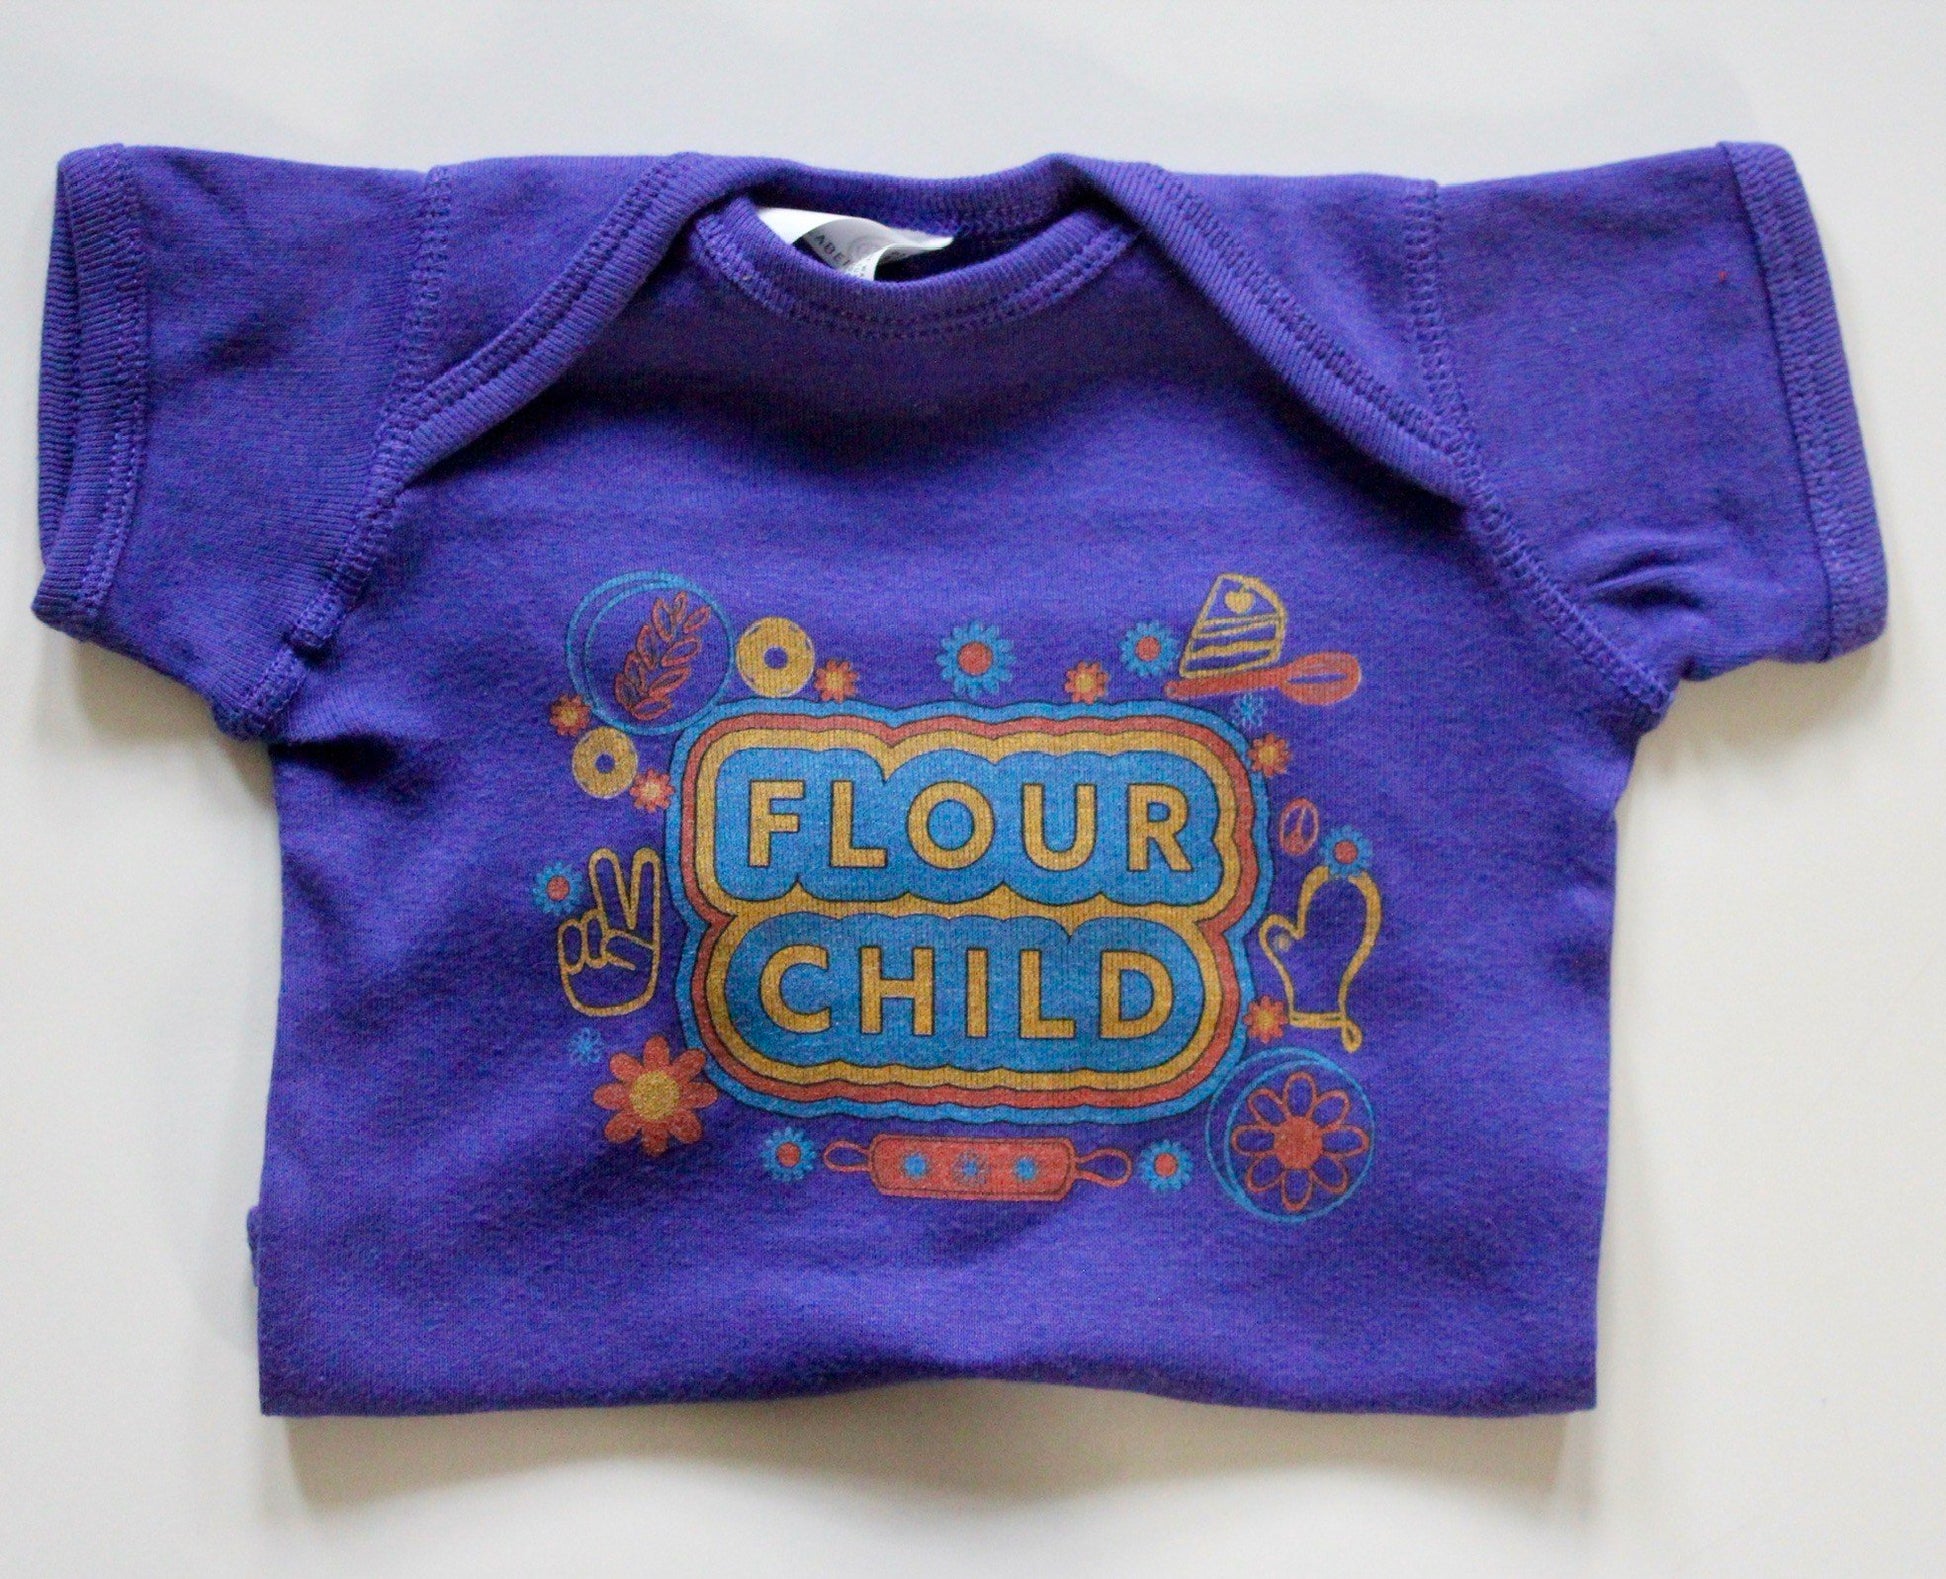 A folded purple baby onesie with the words "Flour Child" and colorful illustrations